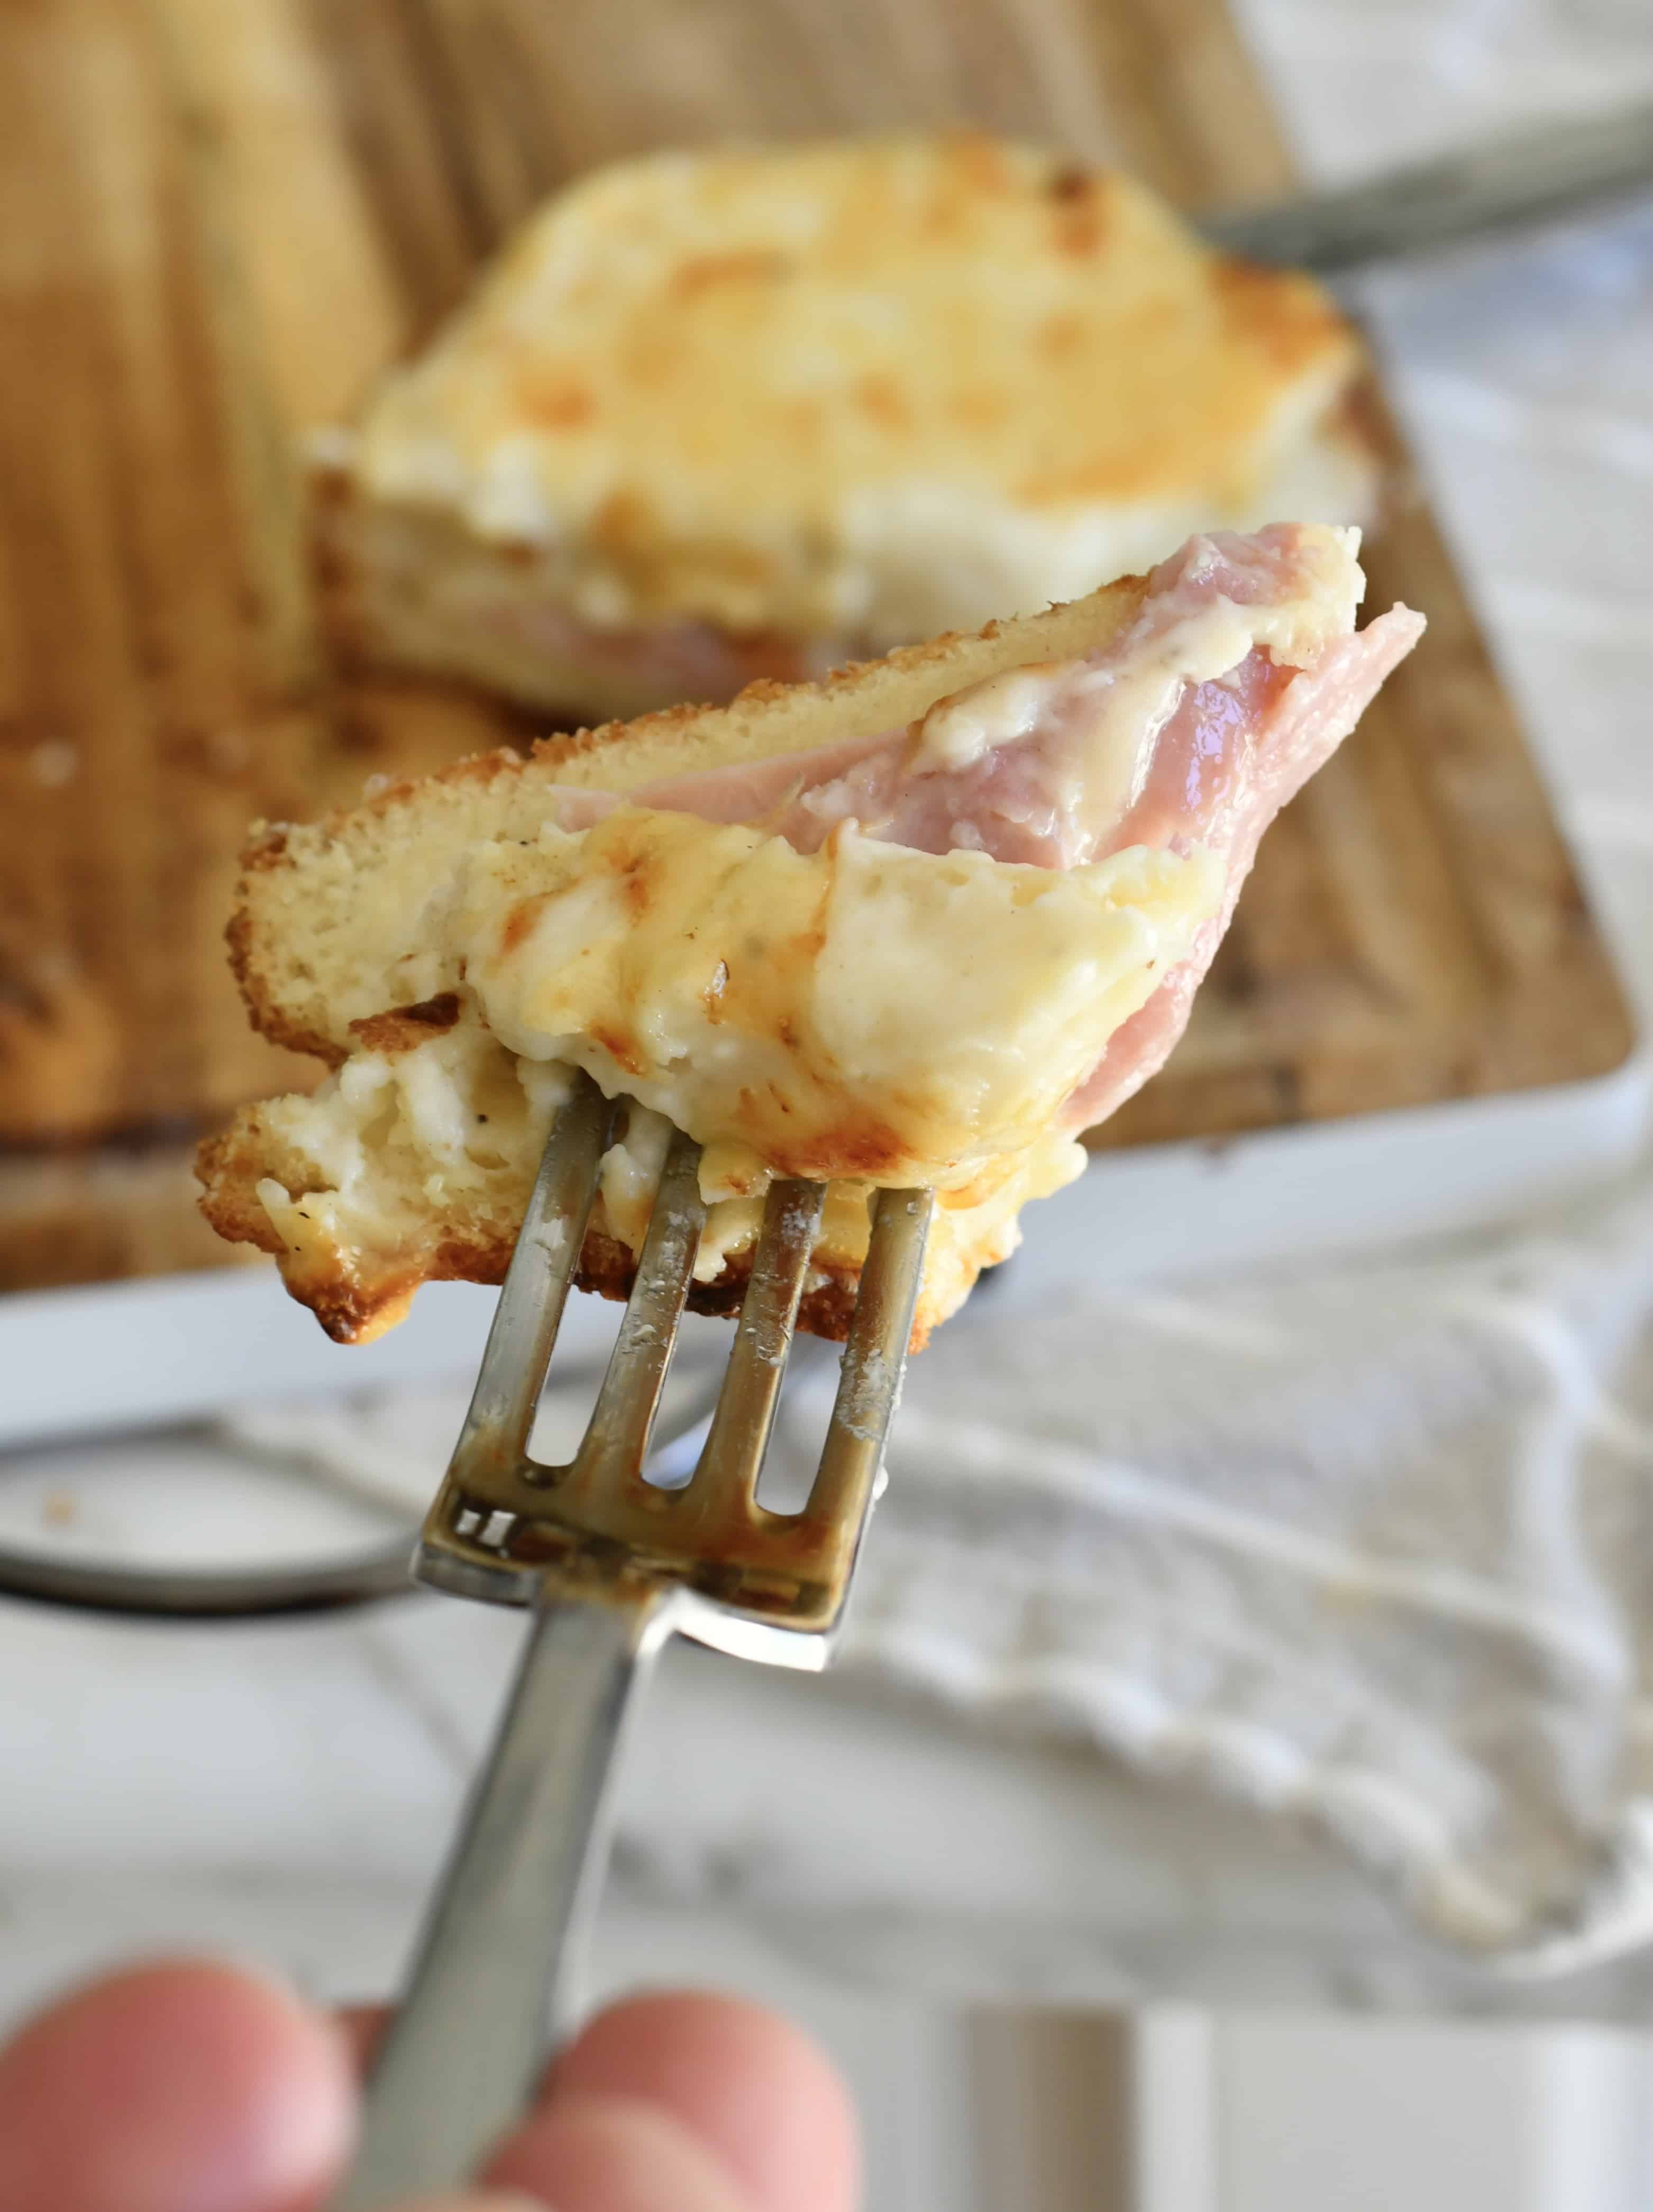 How to make Croque Monsieur - the Best Ham and Cheese Sandwich